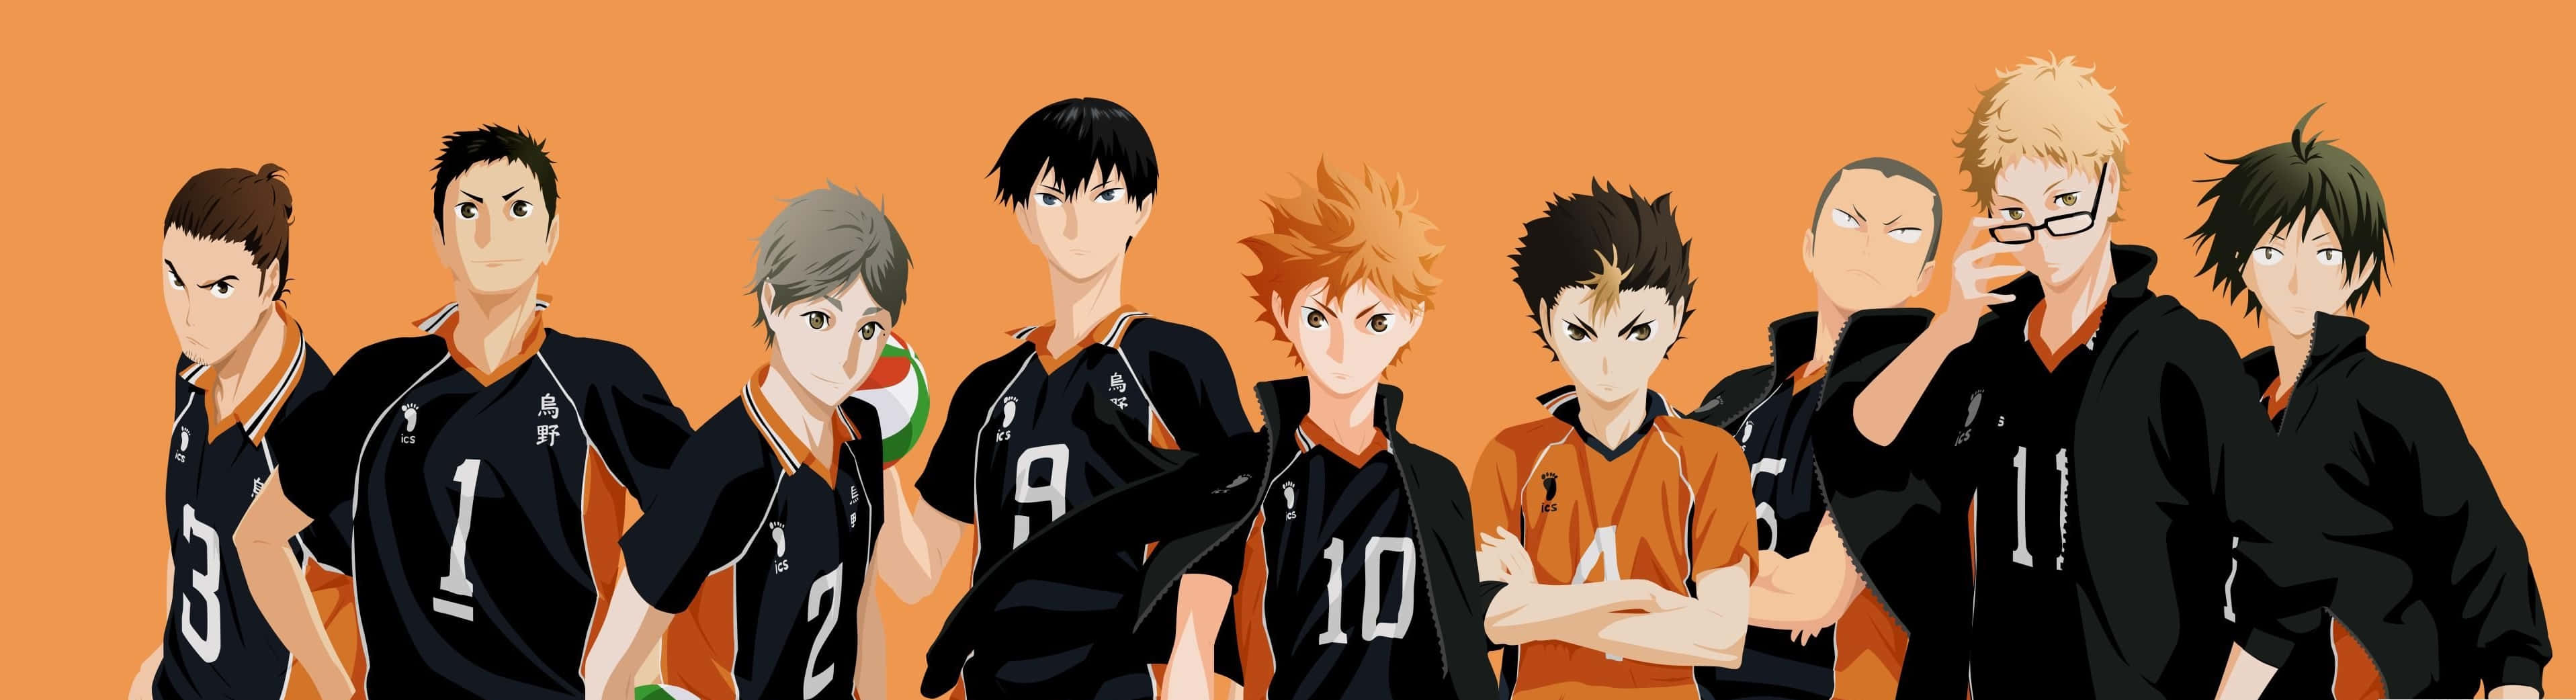 Brighten Up Your Workspace With This Unique Haikyuu-themed Laptop Wallpaper